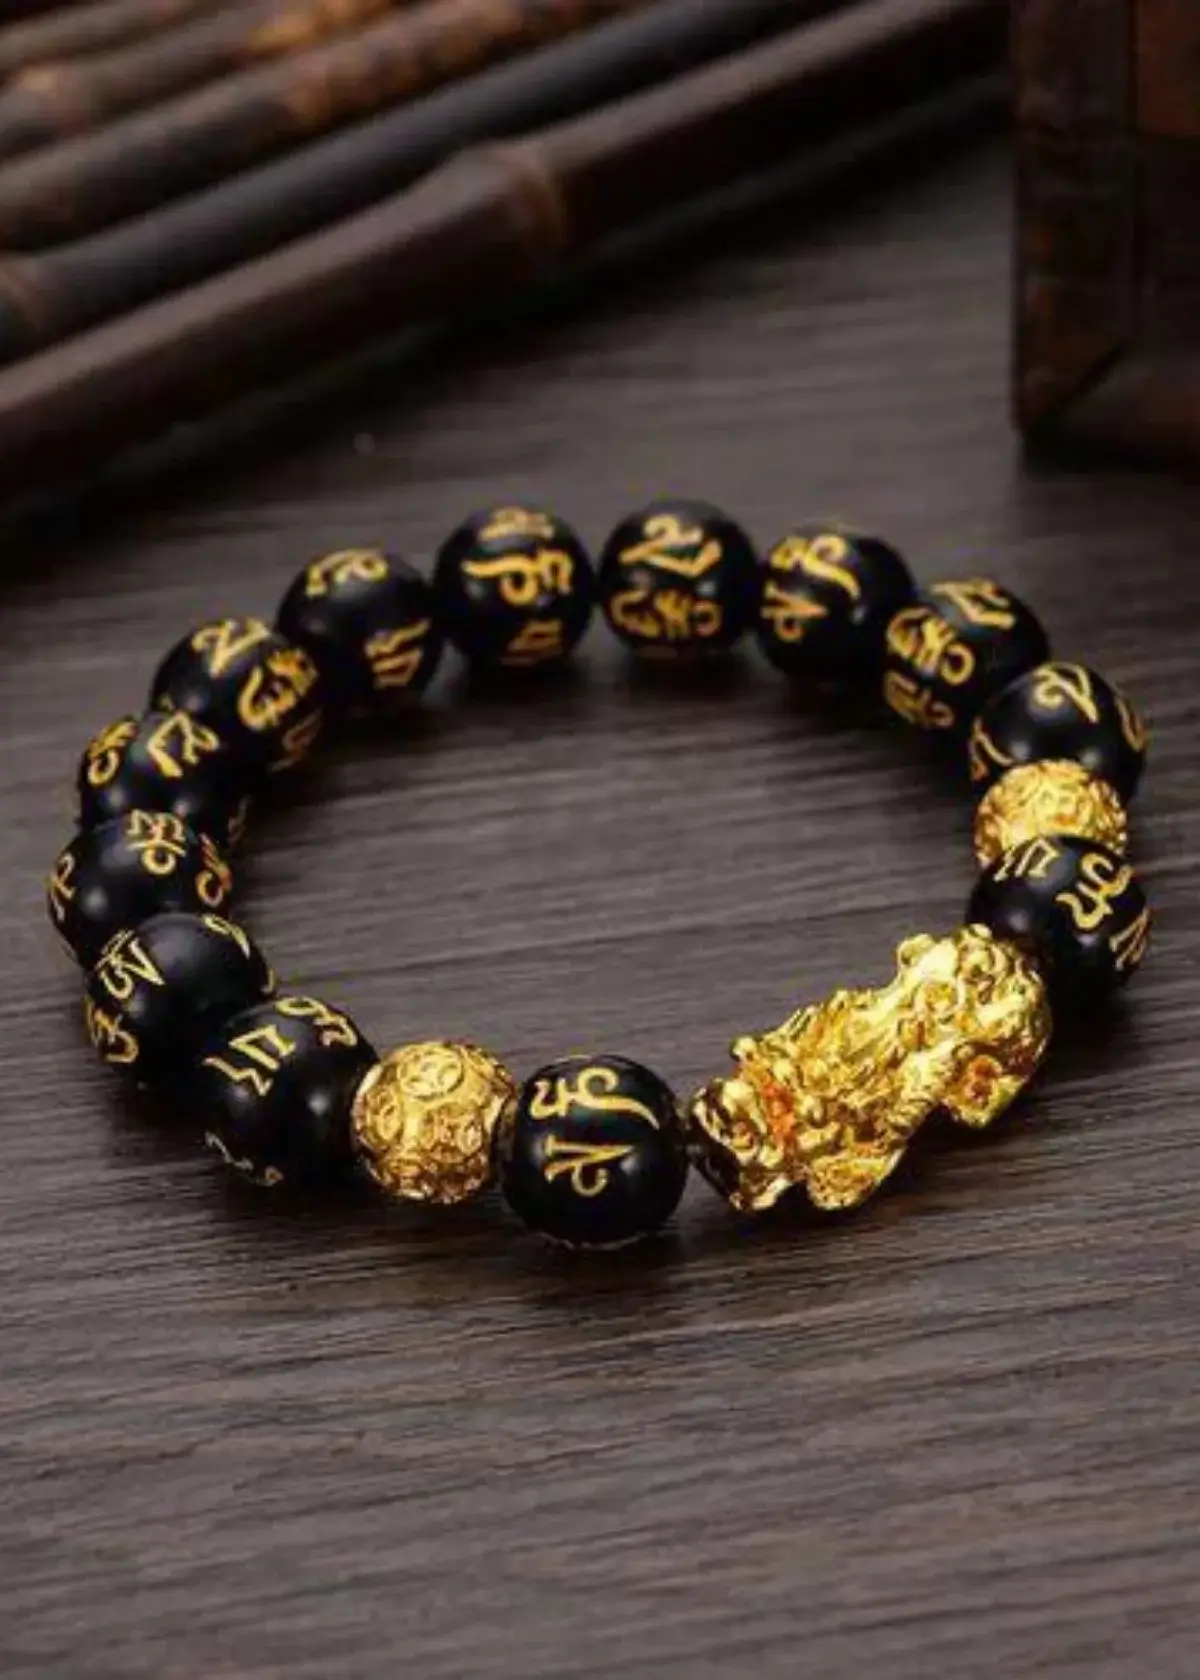 How to choose the right pixiu bracelet?